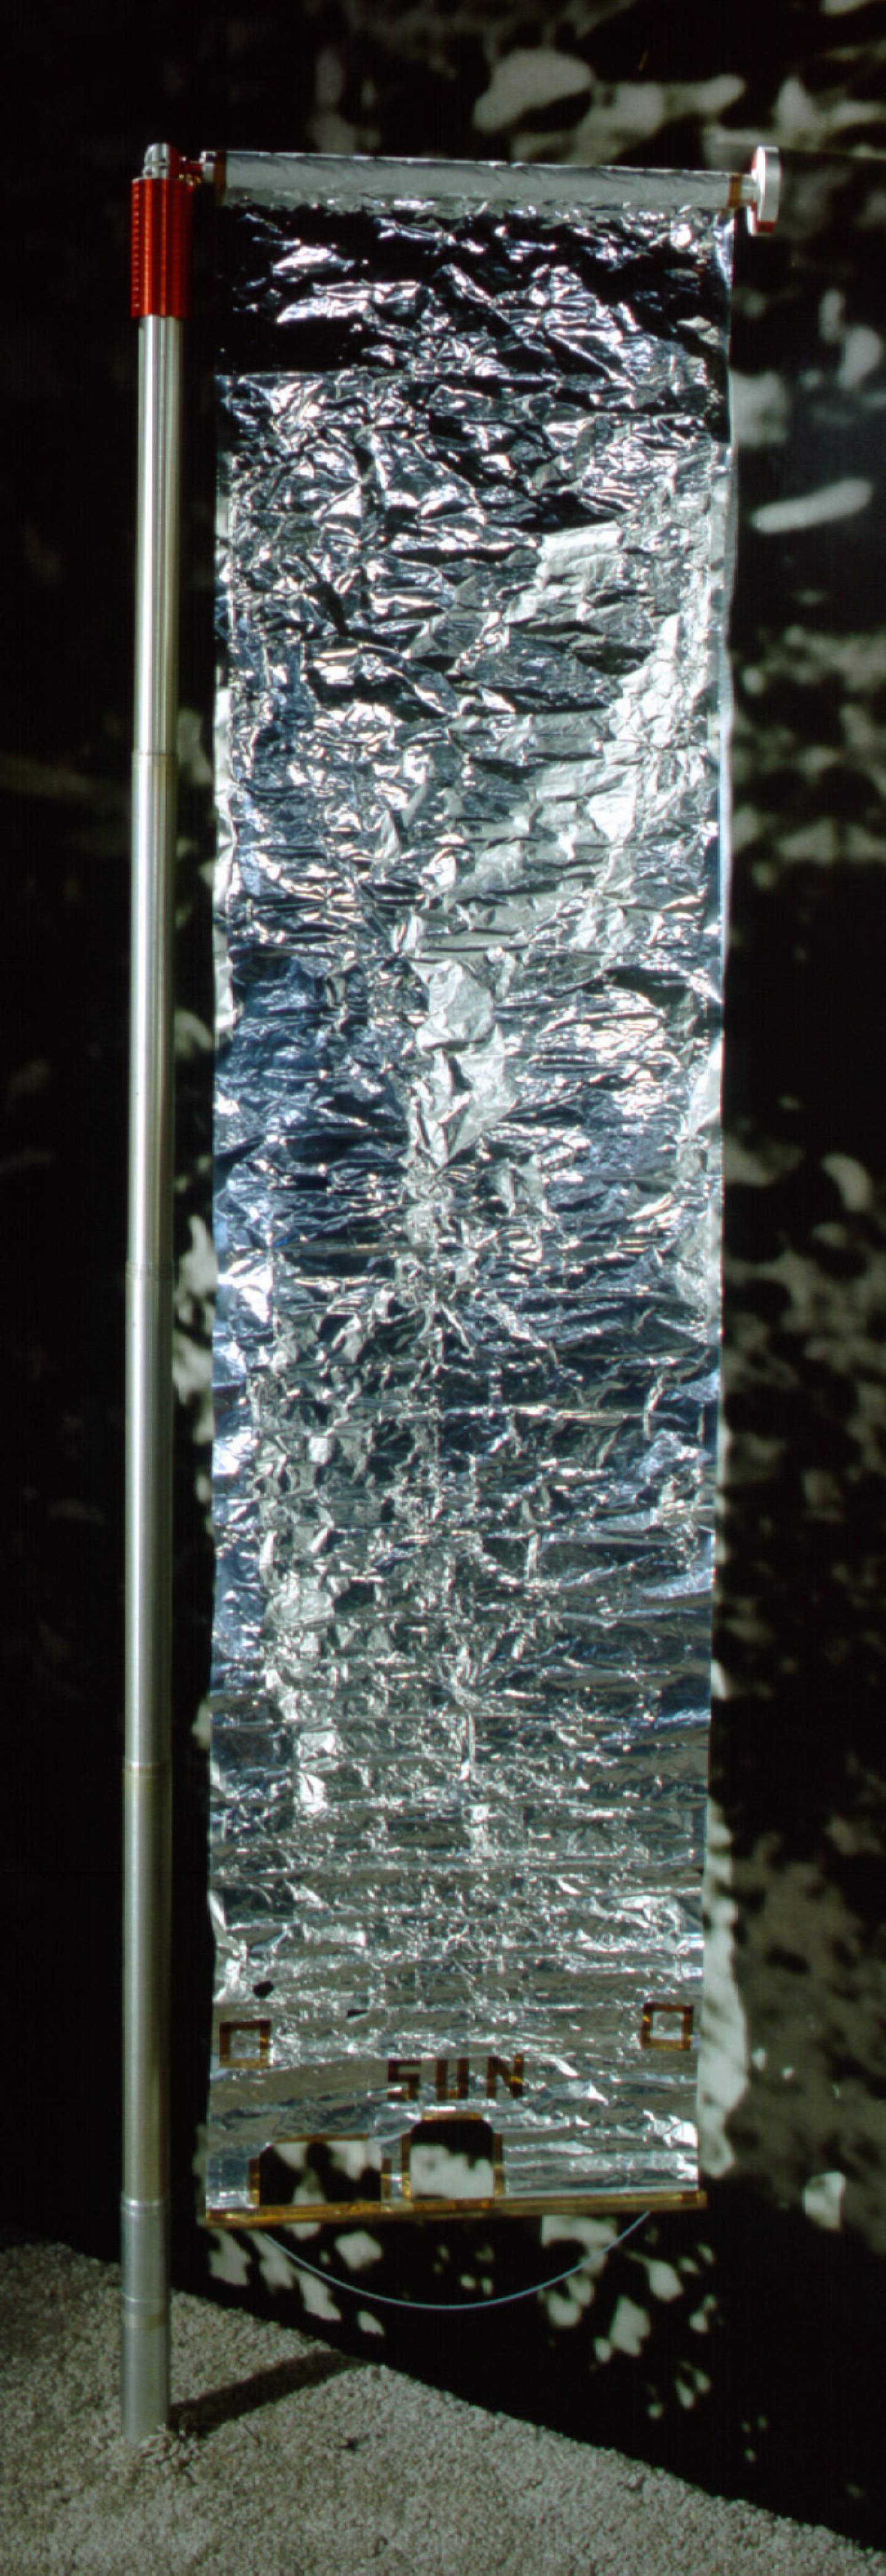 A mockup of the solar wind composition (SWC) experiment